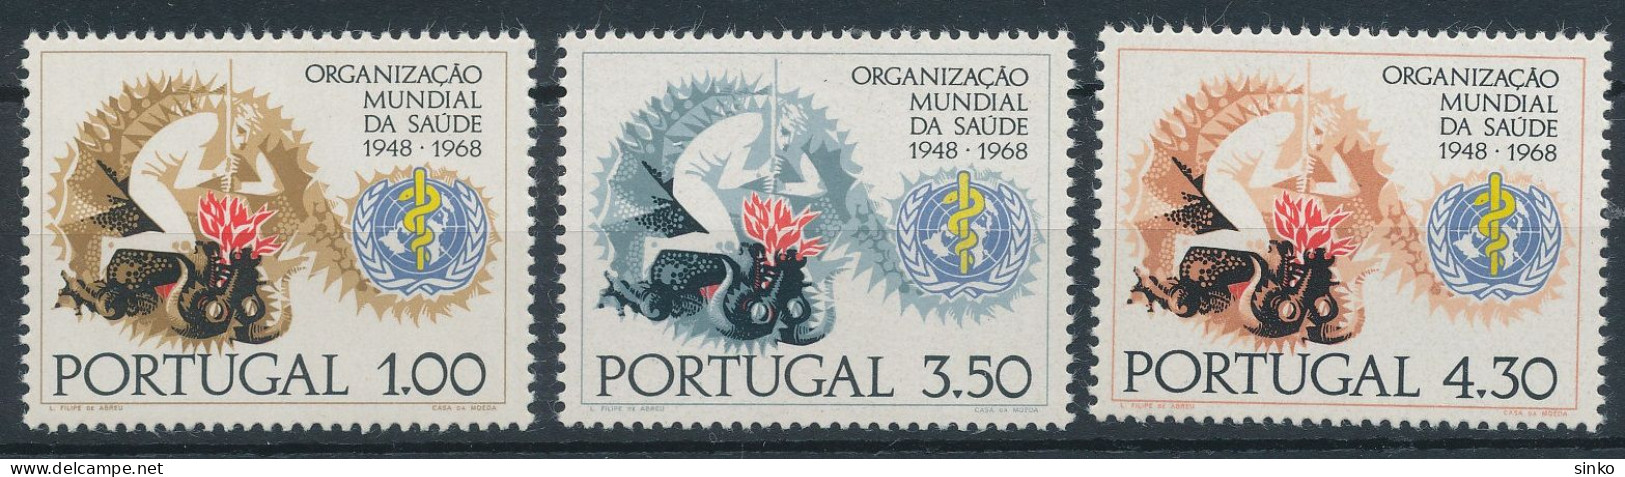 1968. Portugal - WHO - OMS